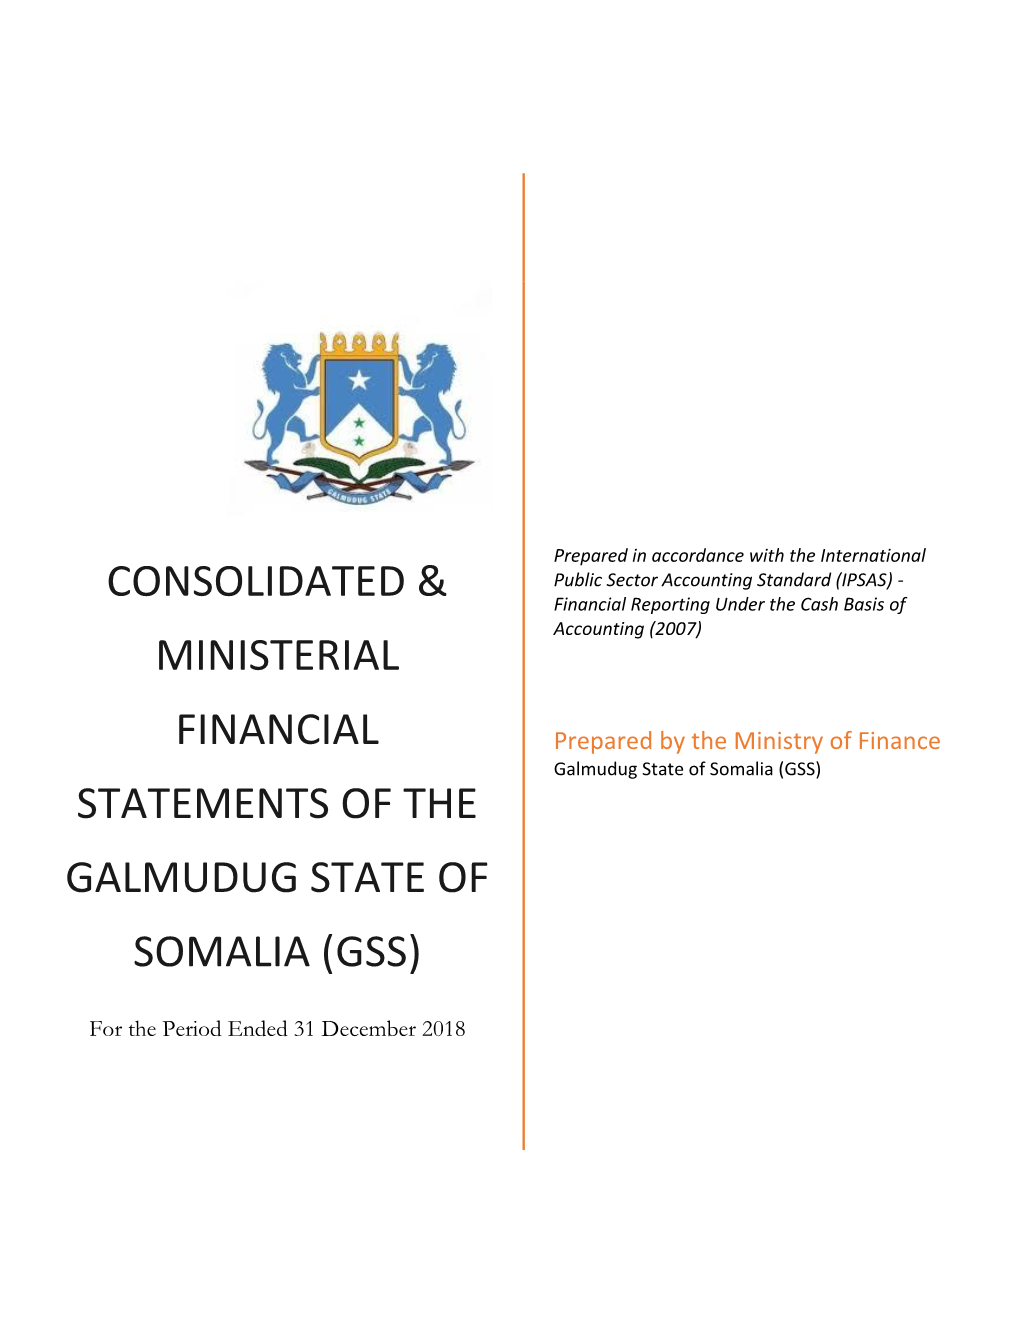 Consolidated & Ministerial Financial Statements of the Galmudug STATE